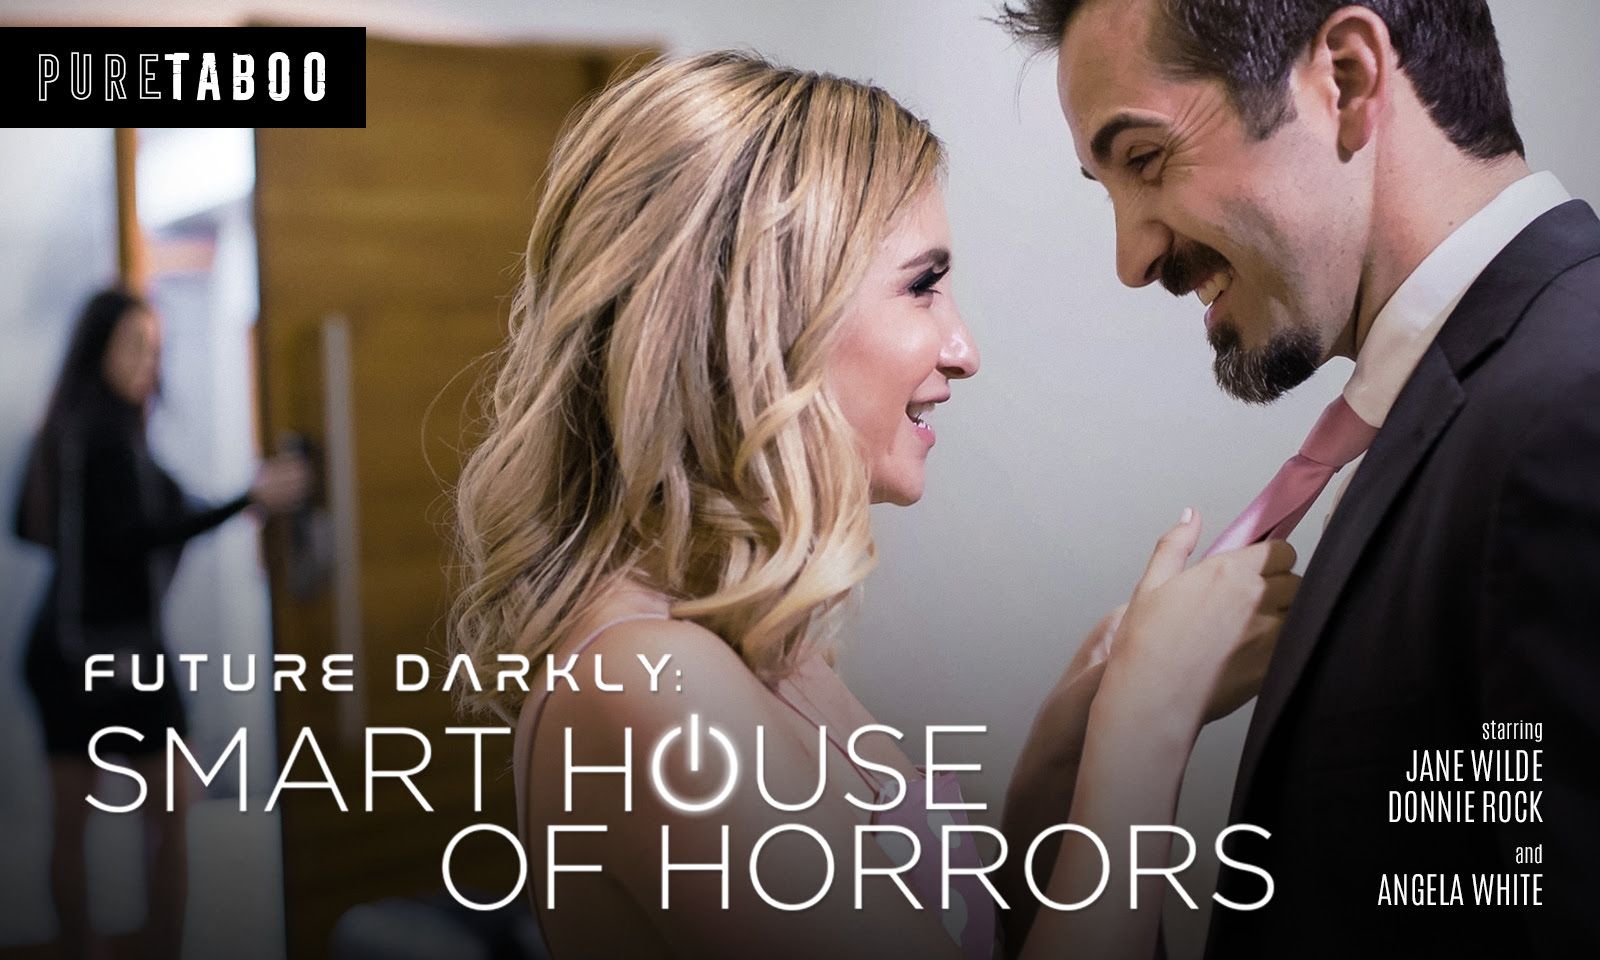 Angela White Gets Caught in Pure Taboo’s 'Smart House of Horrors'